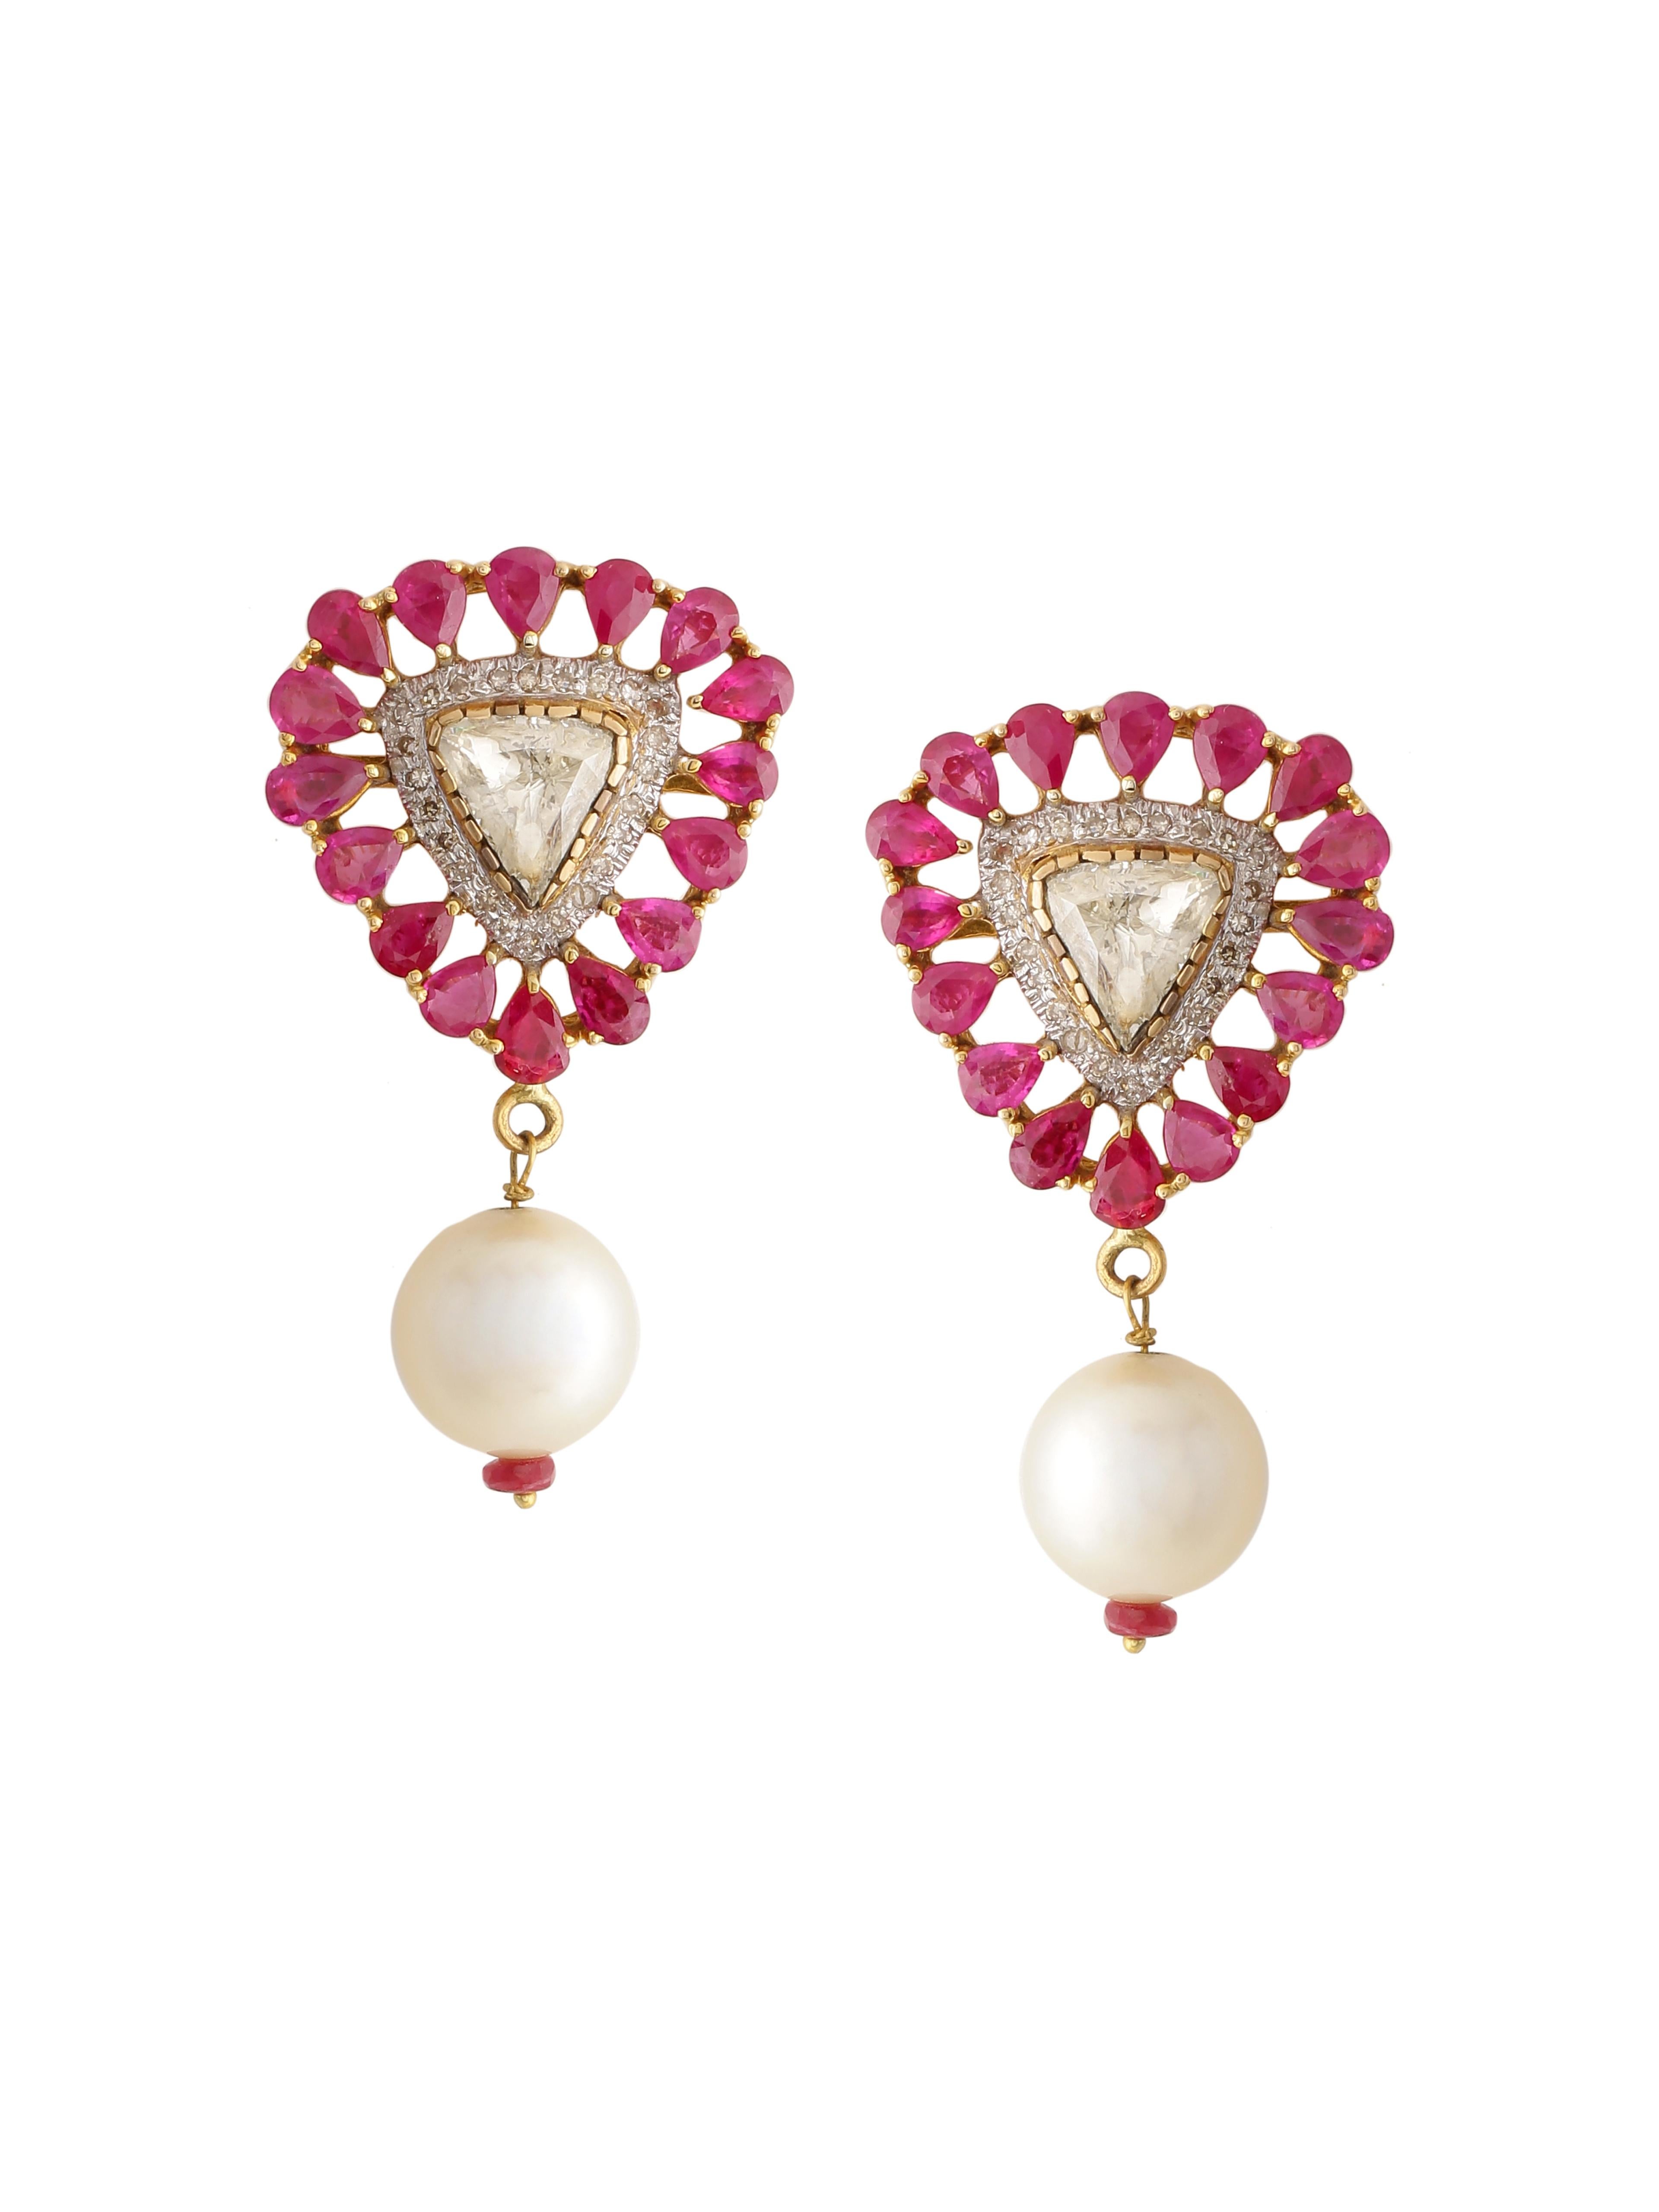 A pair of earring with 1.90 carats diamond rose cut and a row of ruby pear around. The studs have a Pearl bead hanging on it. It’s made in 18K Gold.
The colour combinations make it very versatile and easy to wear with almost all outfits. 

Diamonds